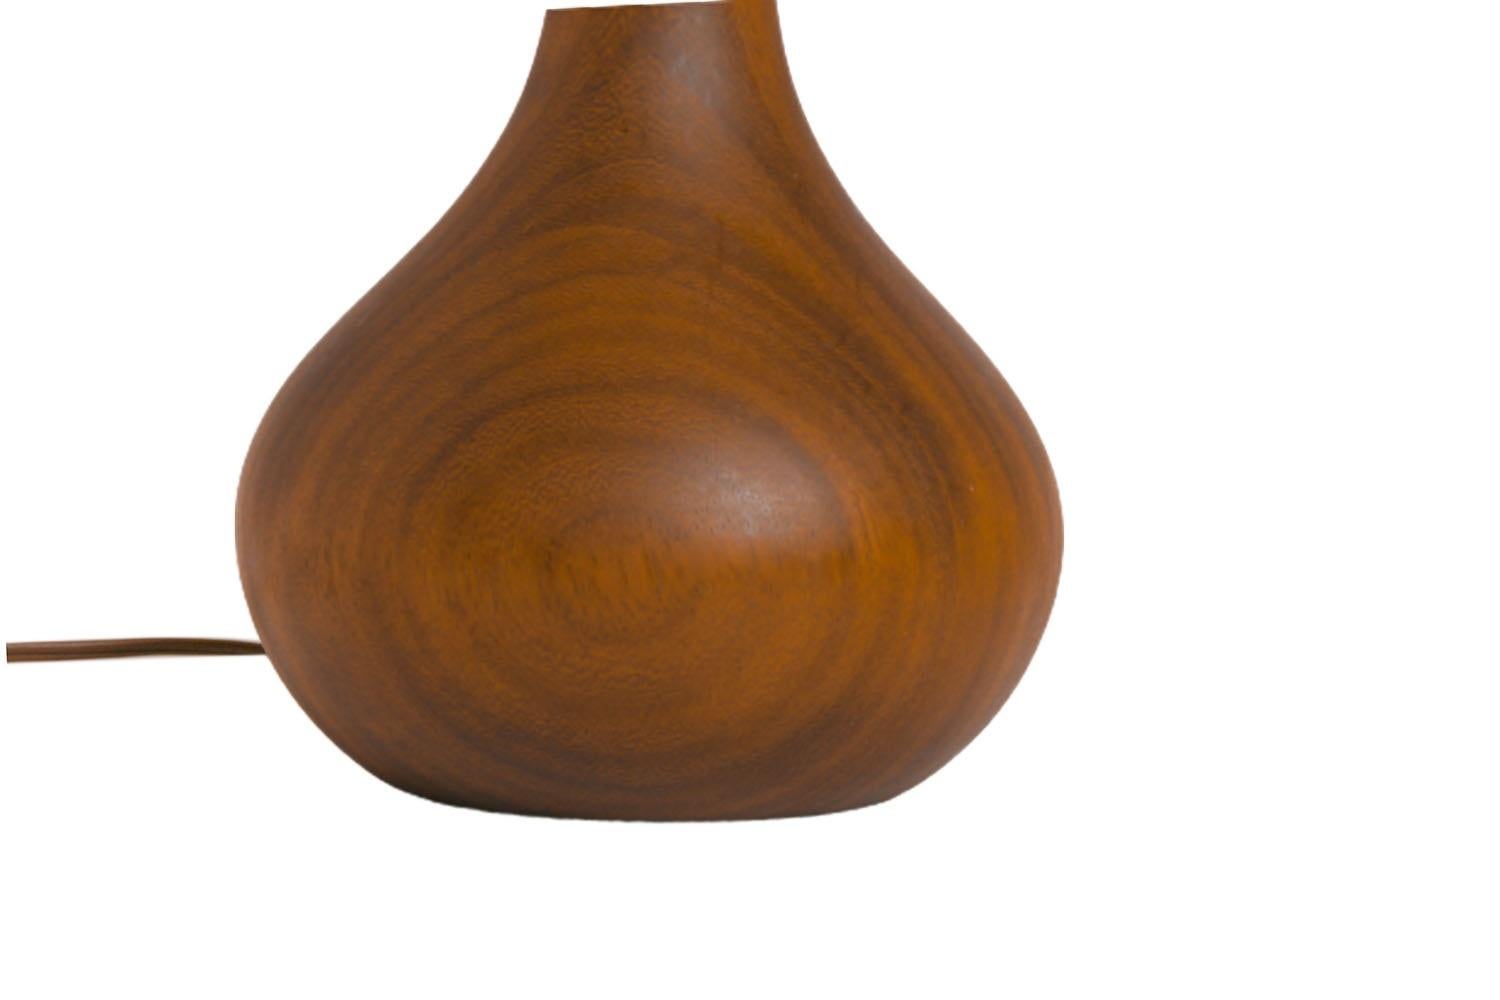 This is an absolutely beautiful mid century teak table lamp of superior craftsmanship, circa 1960s, made in Denmark. Features sculptural bulbous form sleek profile, composed of a rich teak grain, with a rich wood finish. The lamp is fitted with an